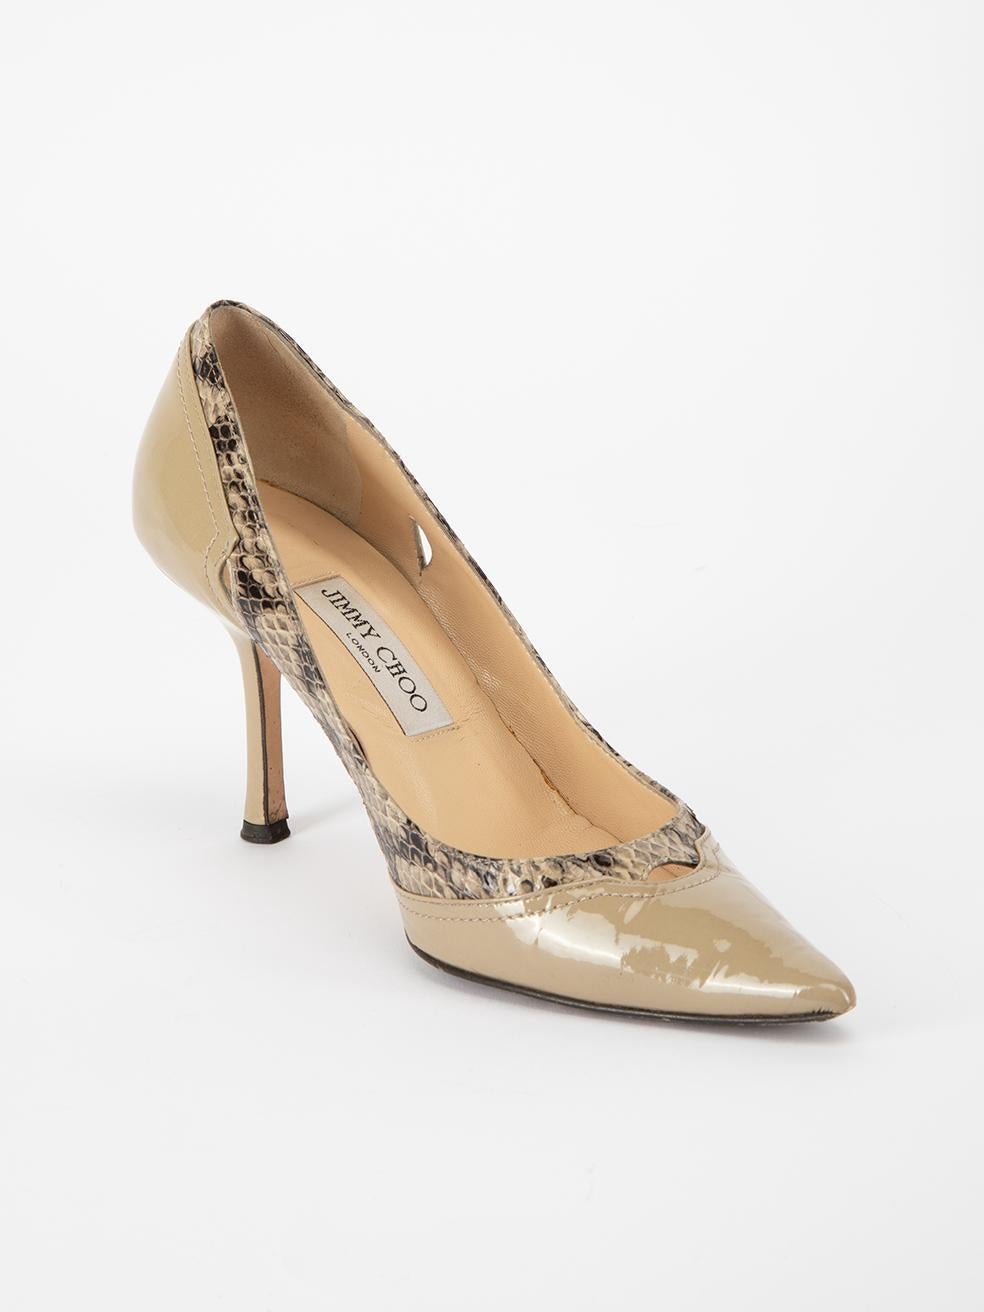 CONDITION is Very good. Minimal wear to shoes is evident. Wear to toe points on both shoes and pilling to interior suede material. There is also wear to the sole material near the heel tip on this used Jimmy Choo designer resale item. This item